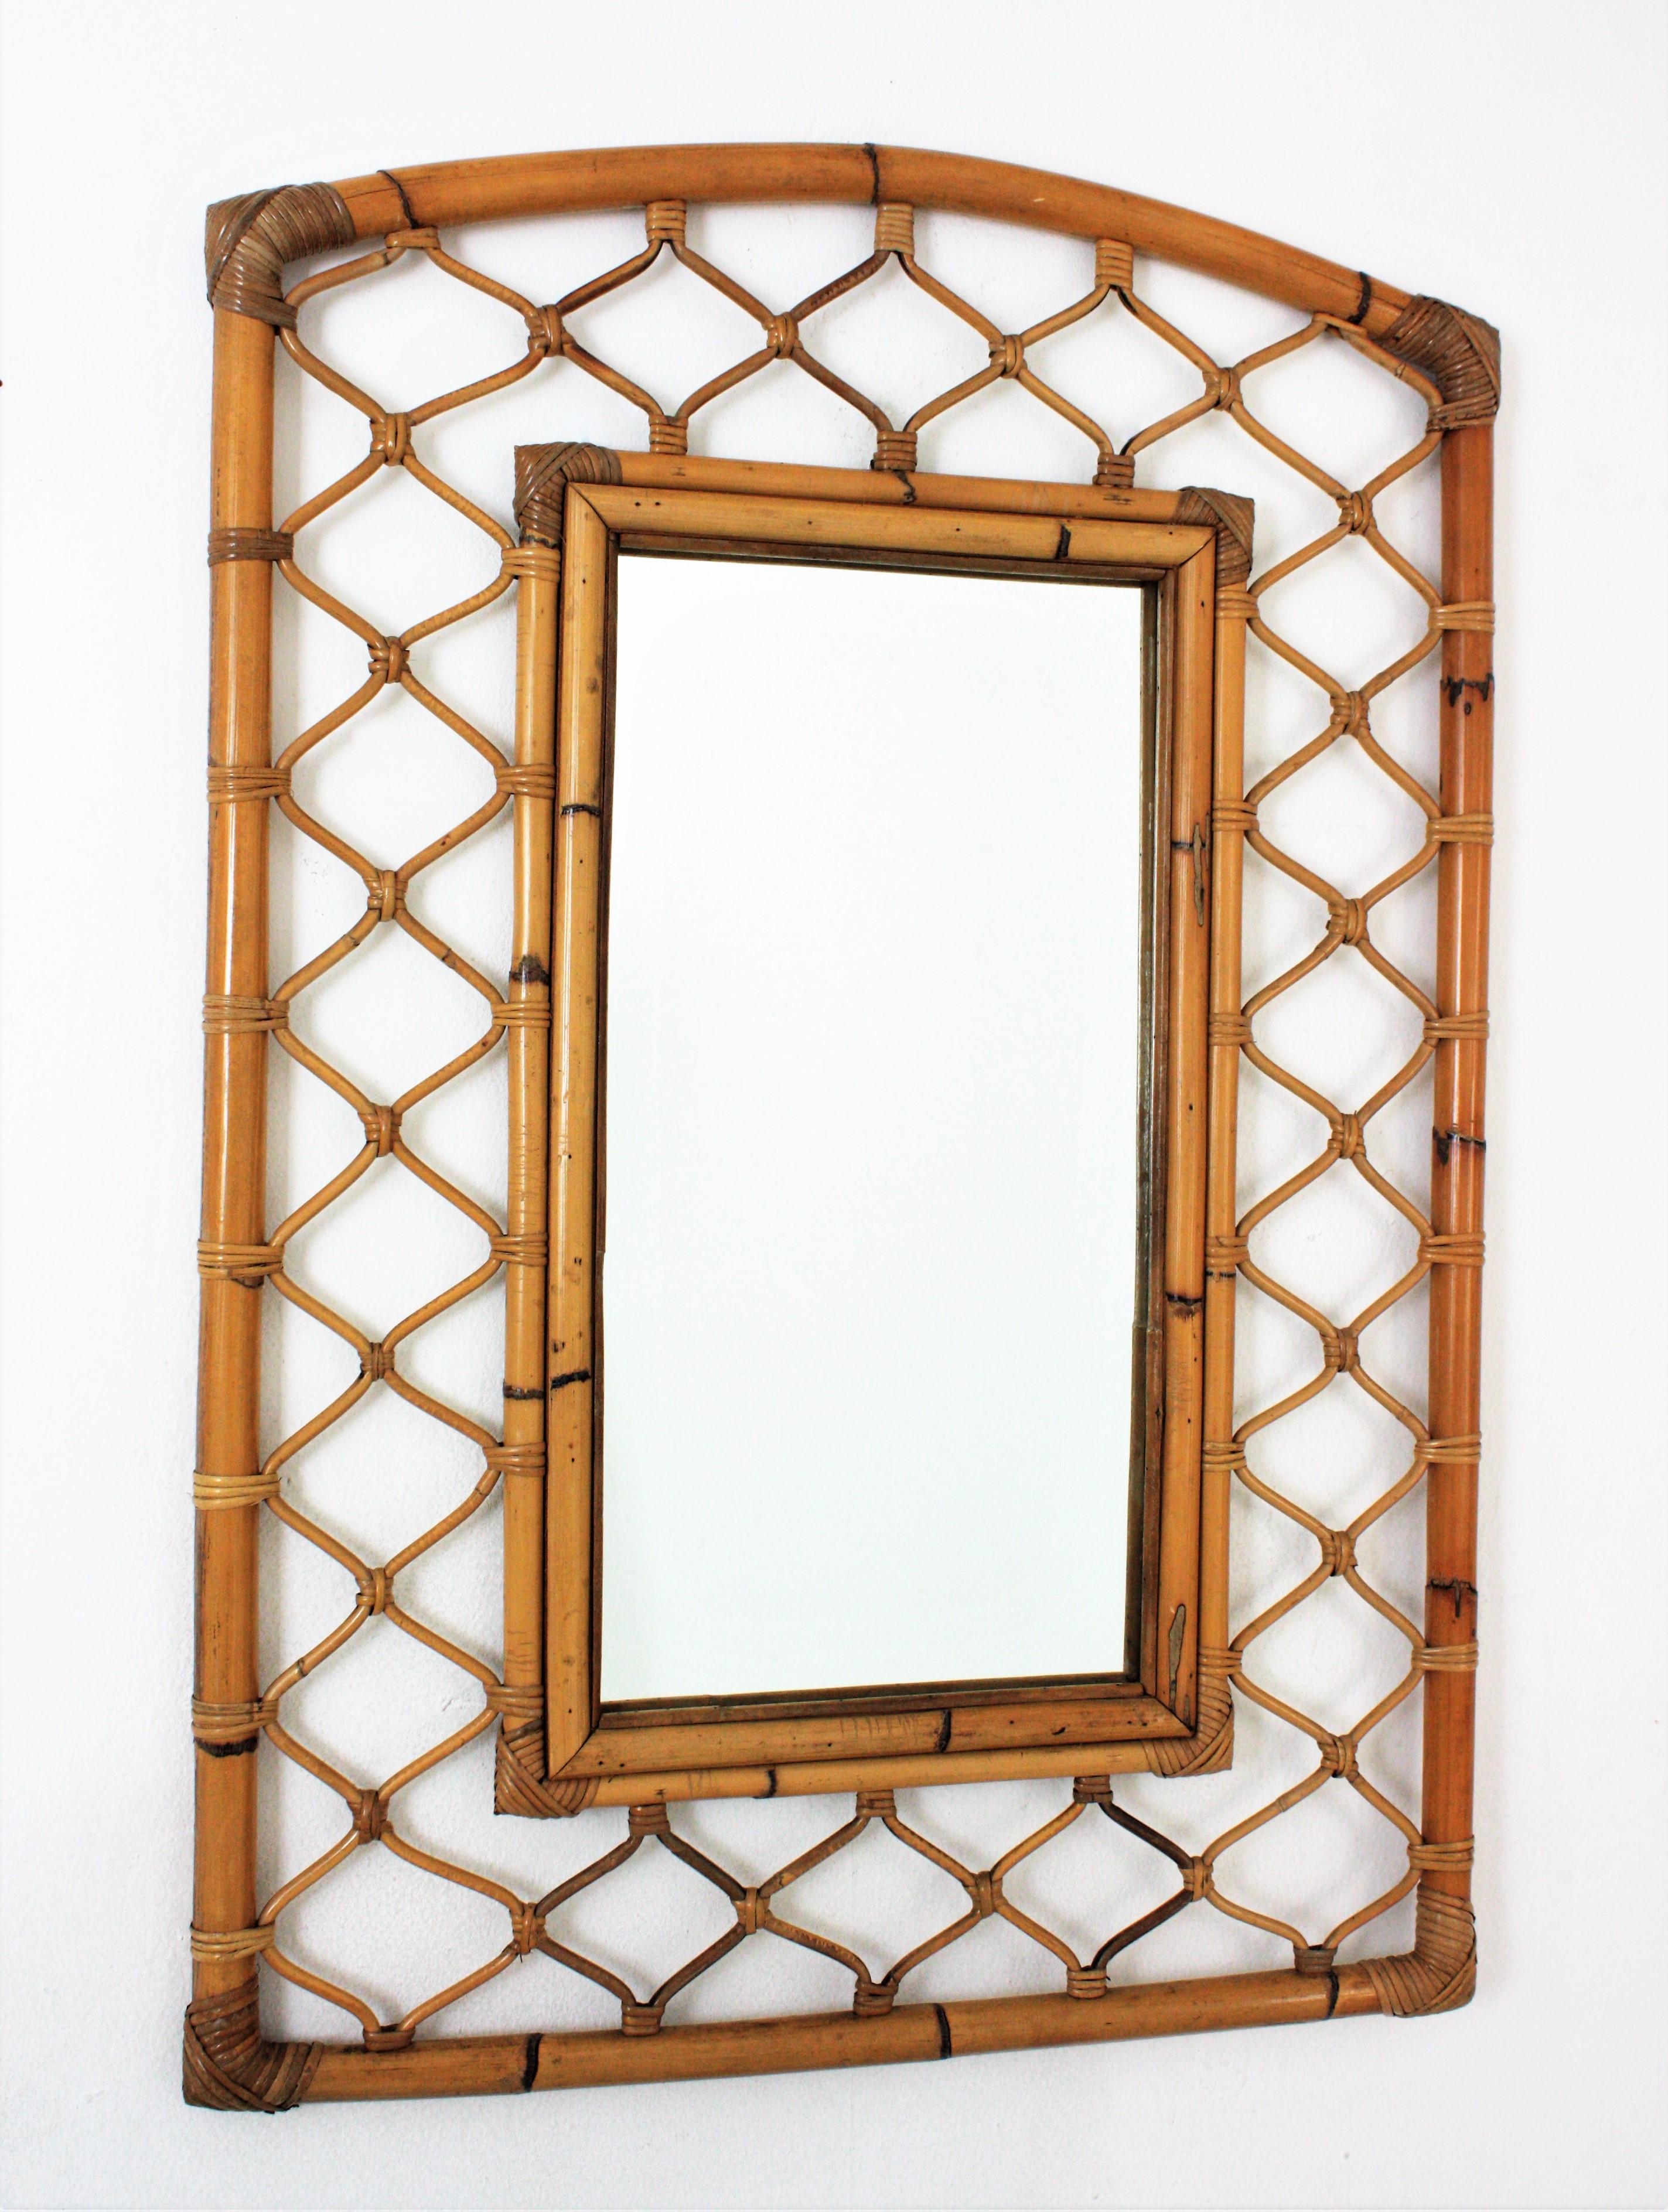 Eye-catching mid-century rectangular mirror with rattan bamboo frame. Spain, 1960s.
This Mediterranean wall mirror has a highly decorative frame made of two concentric rectangular bamboo frames with a rattan grid decoration between them. It has